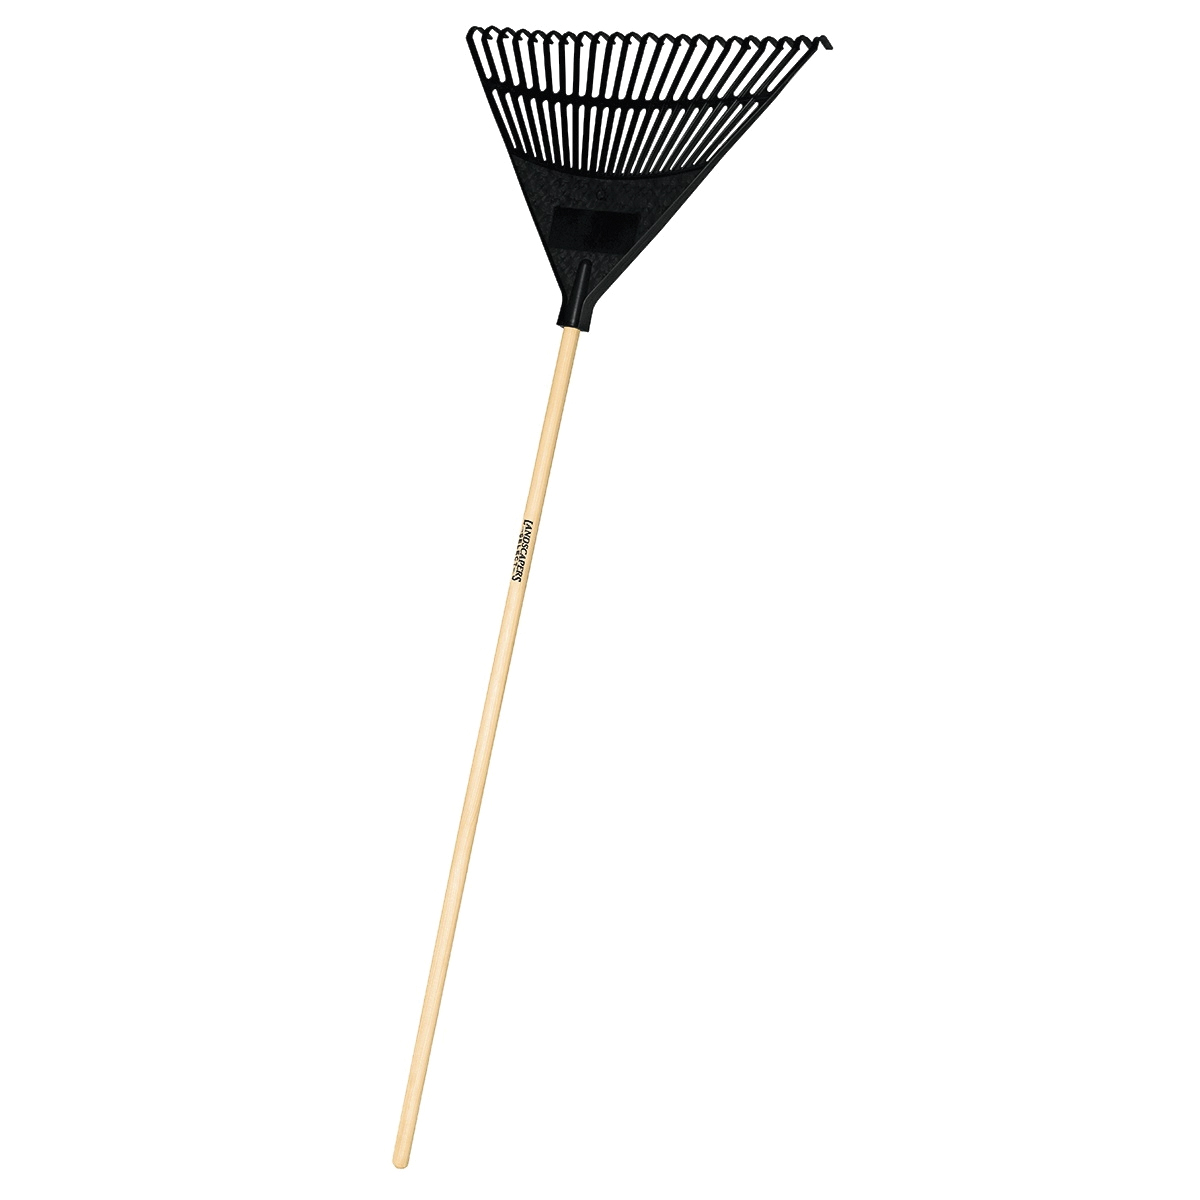 Landscapers Select 34591 EP22OR Lawn/Leaf Rake, Poly Tine, 22-Tine, Hardwood Handle, 48 in L Handle - 1